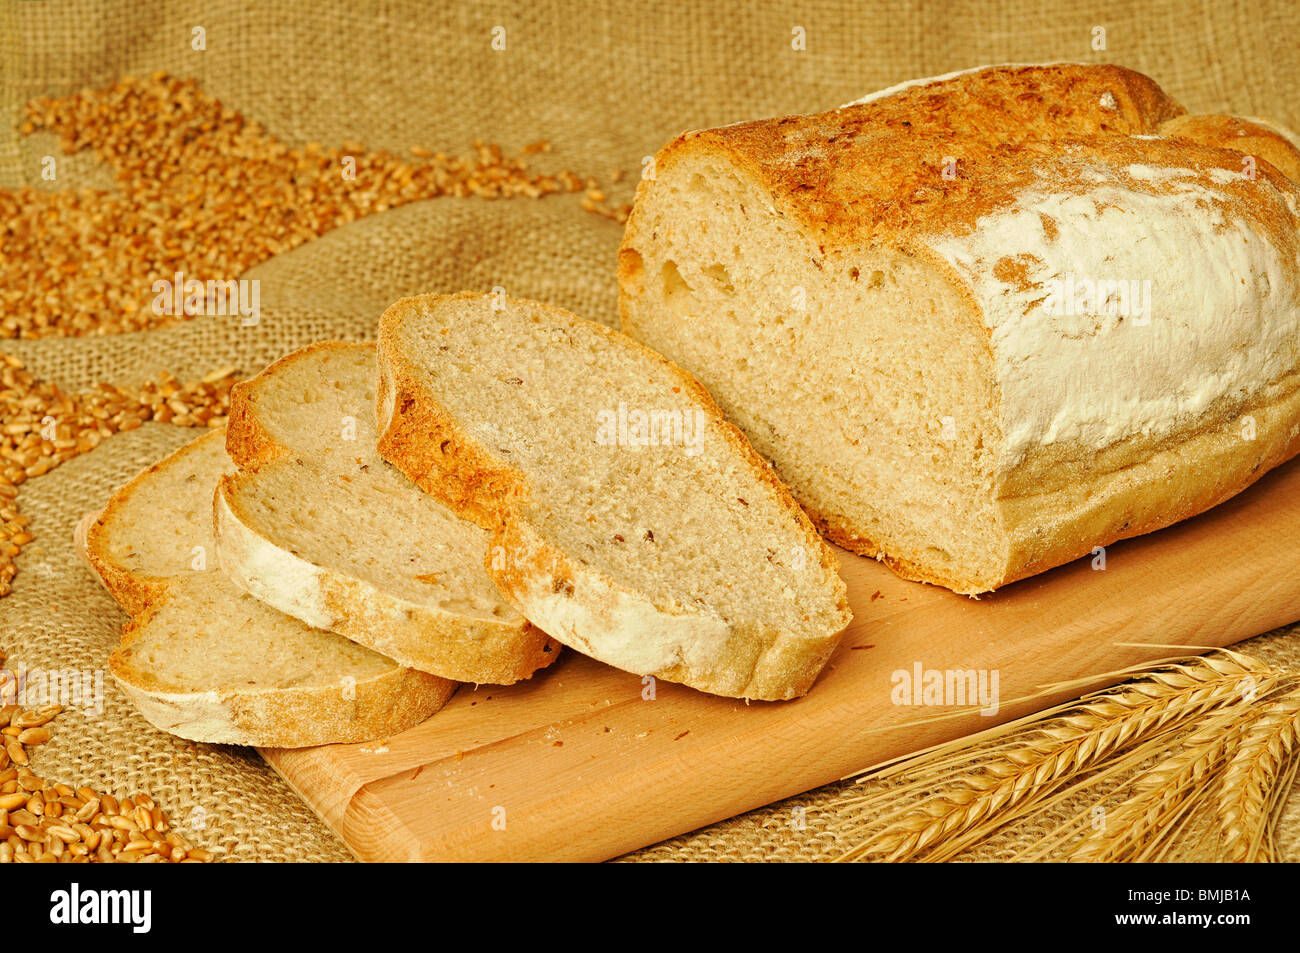 Loaf of Bread Stock Photo